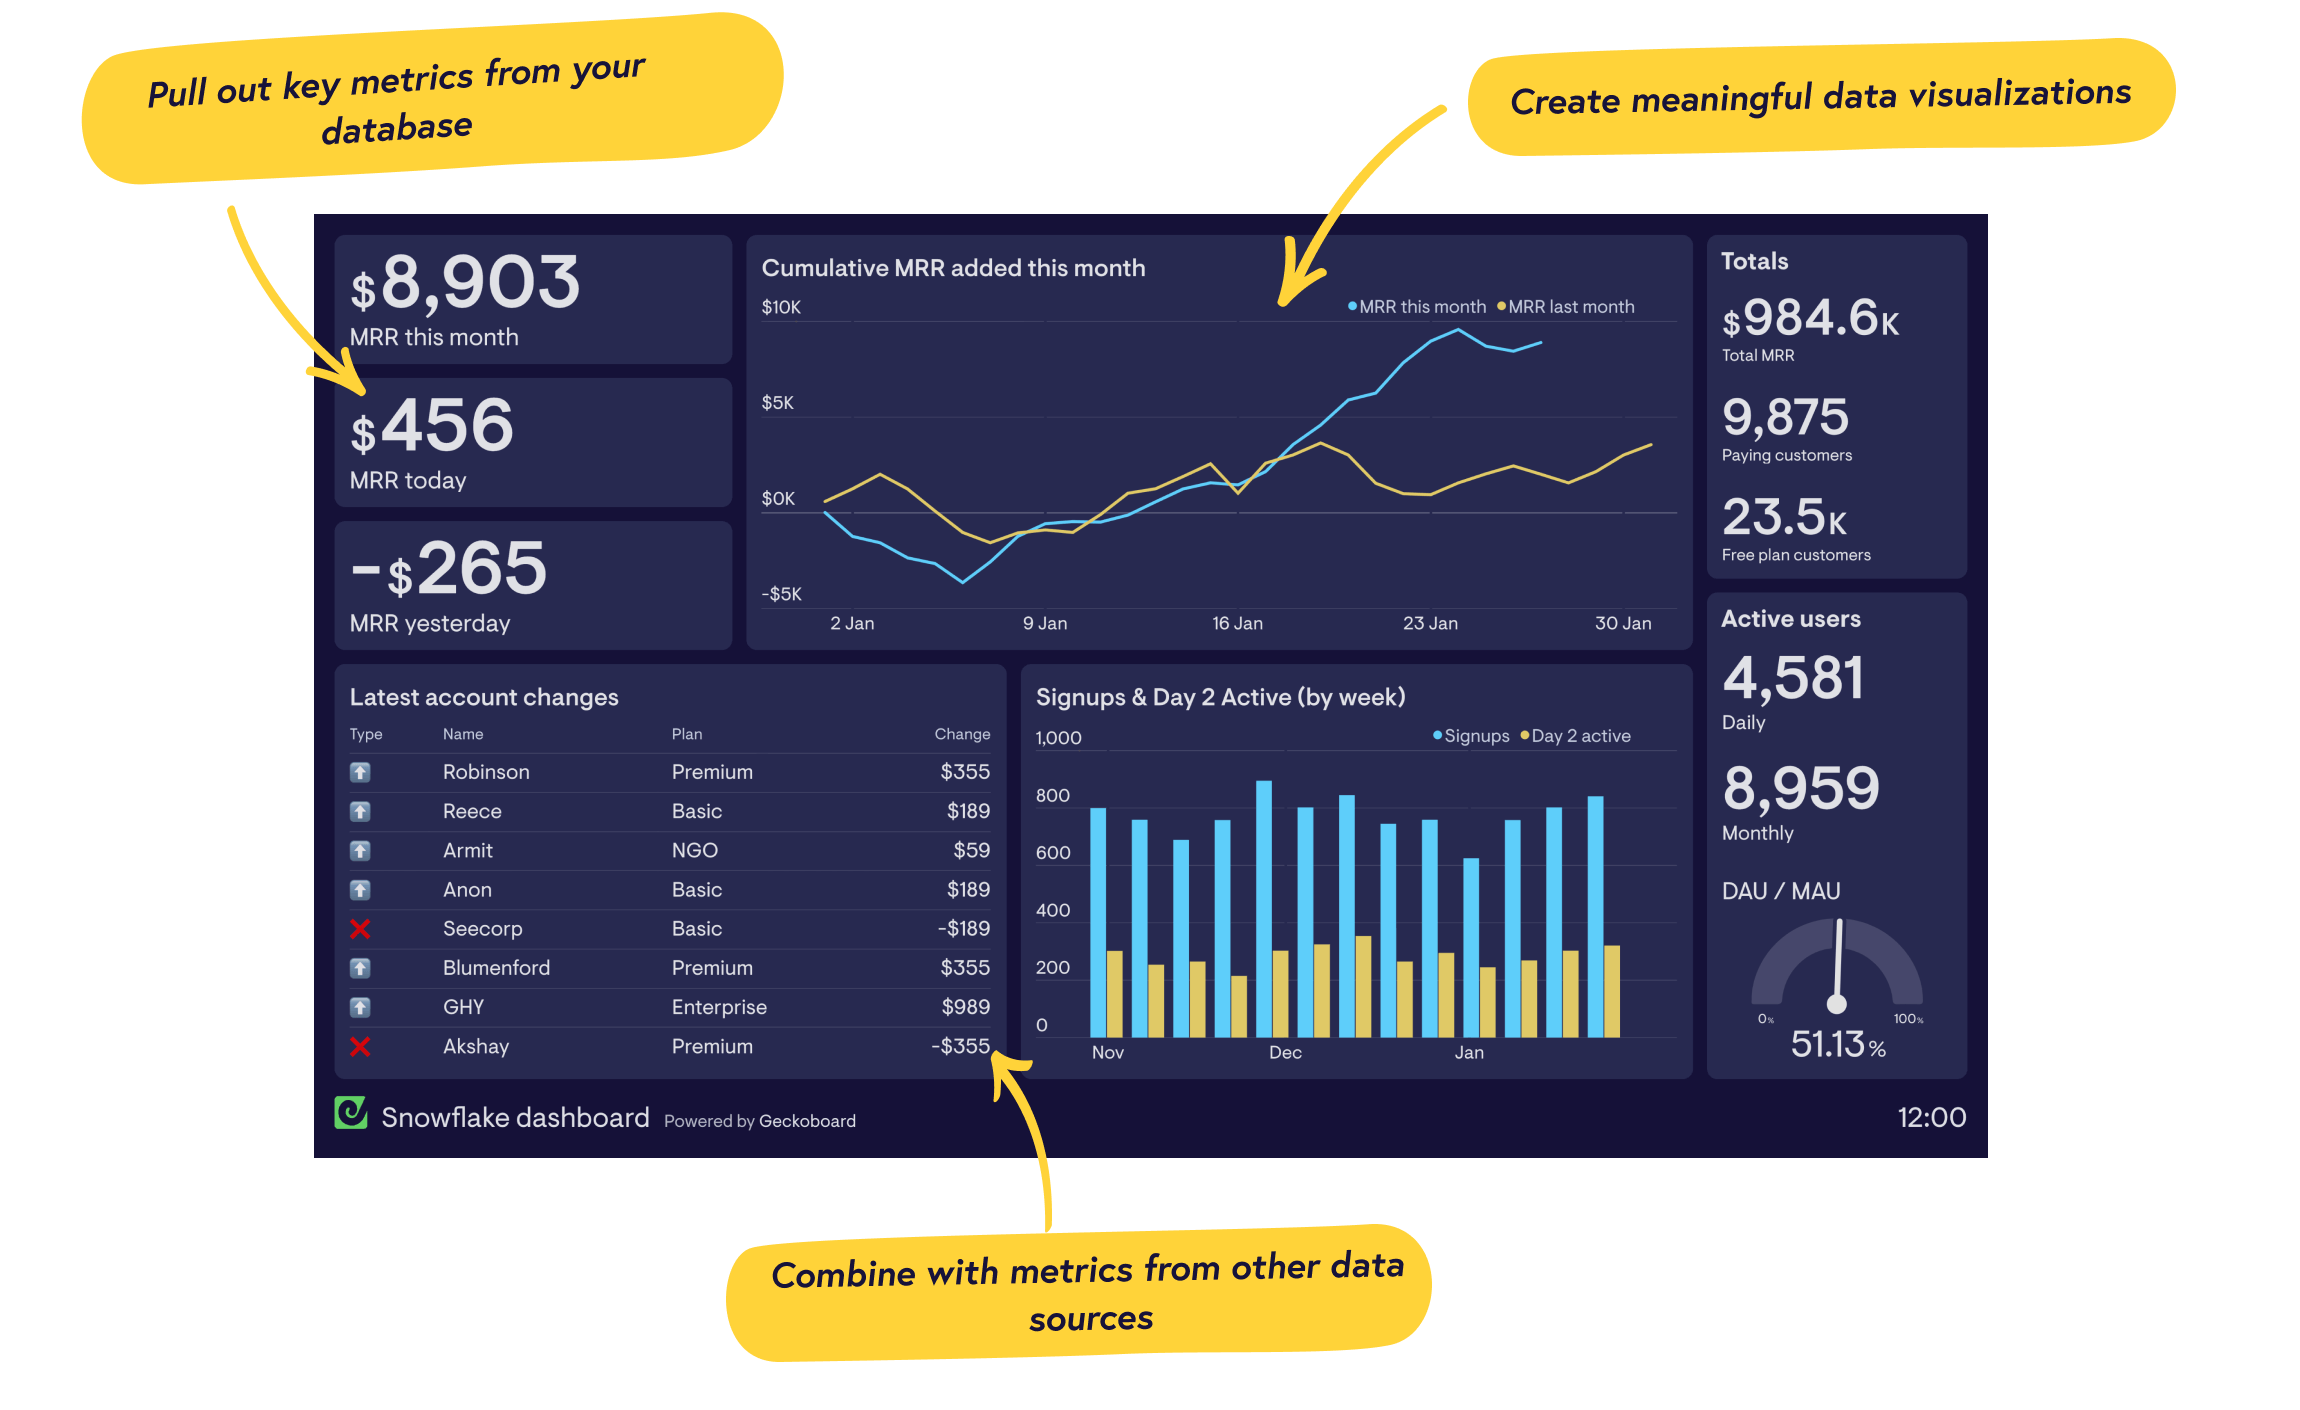 Real-time Snowflake dashboards from Geckoboard